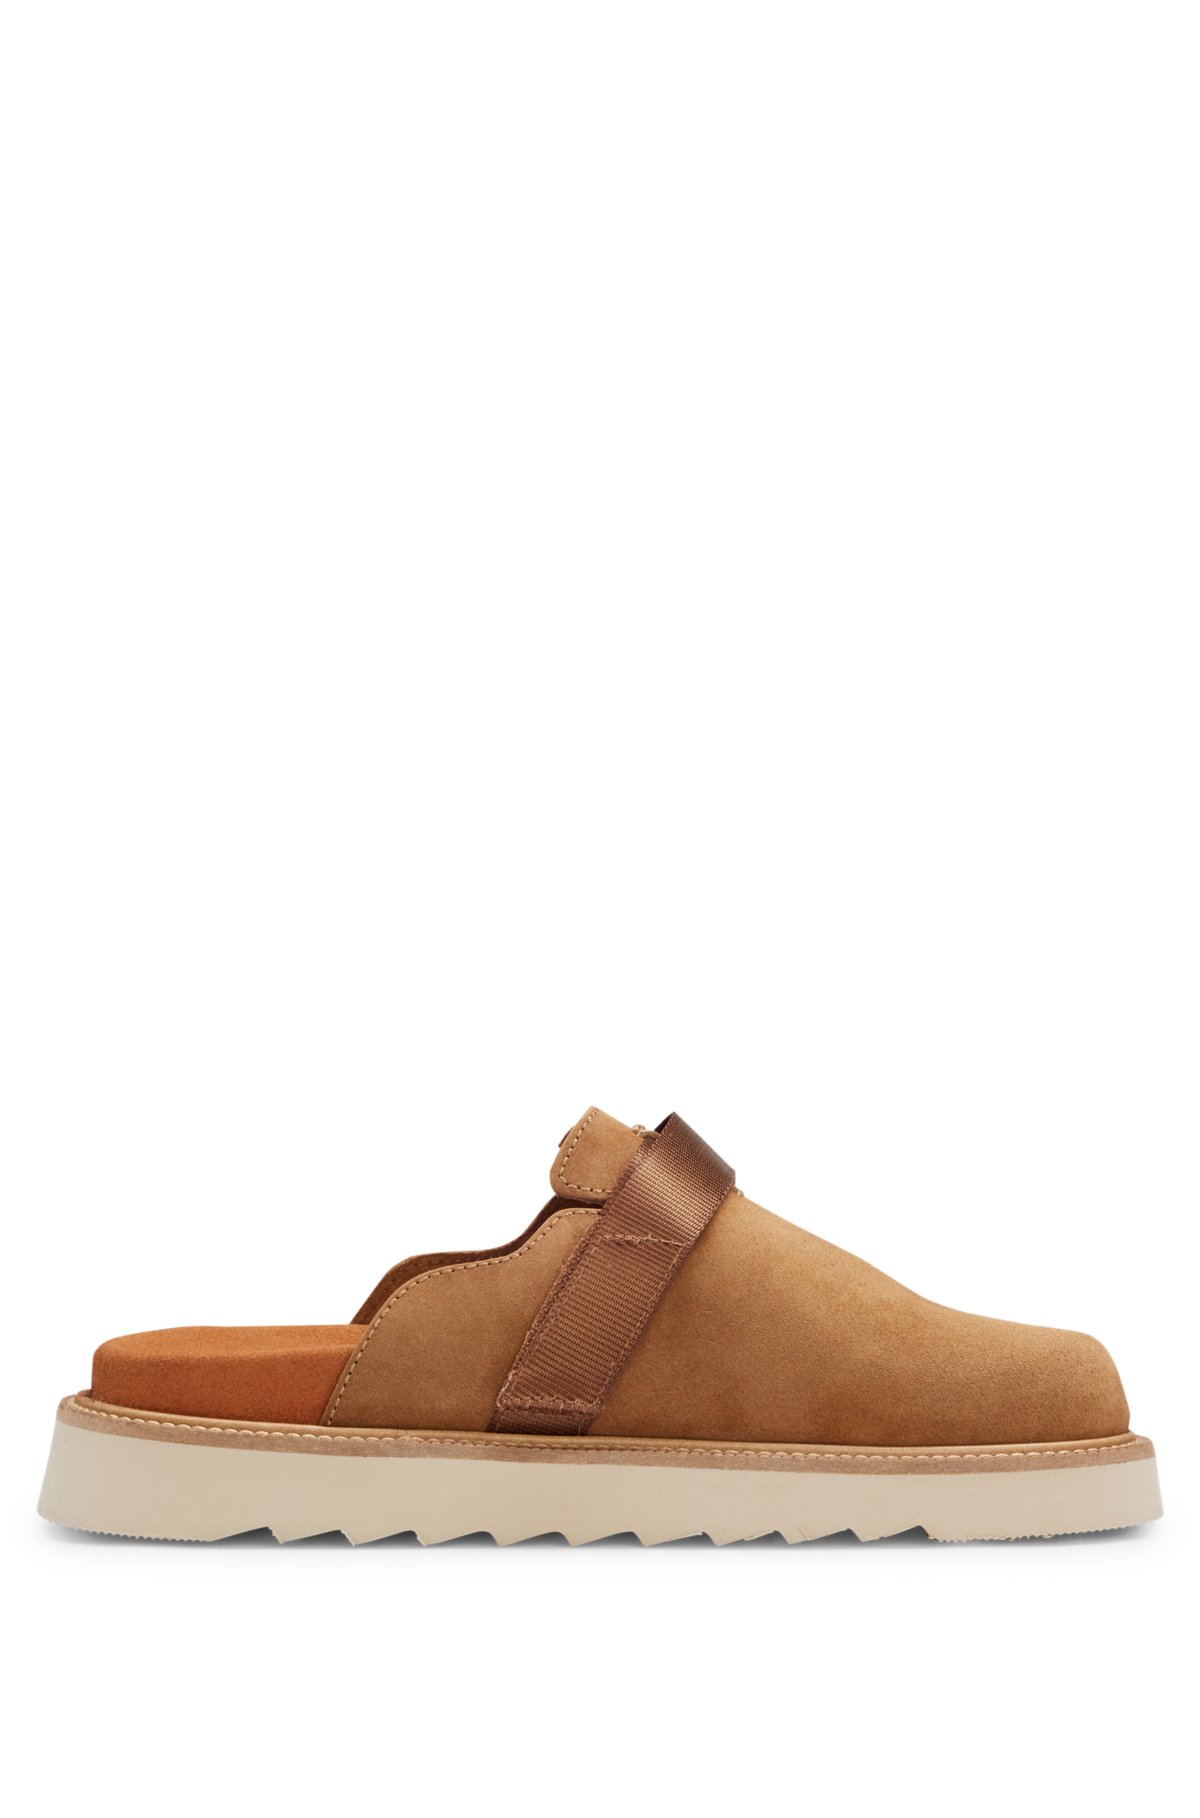 Suede slip-on shoes with buckled strap, Brown